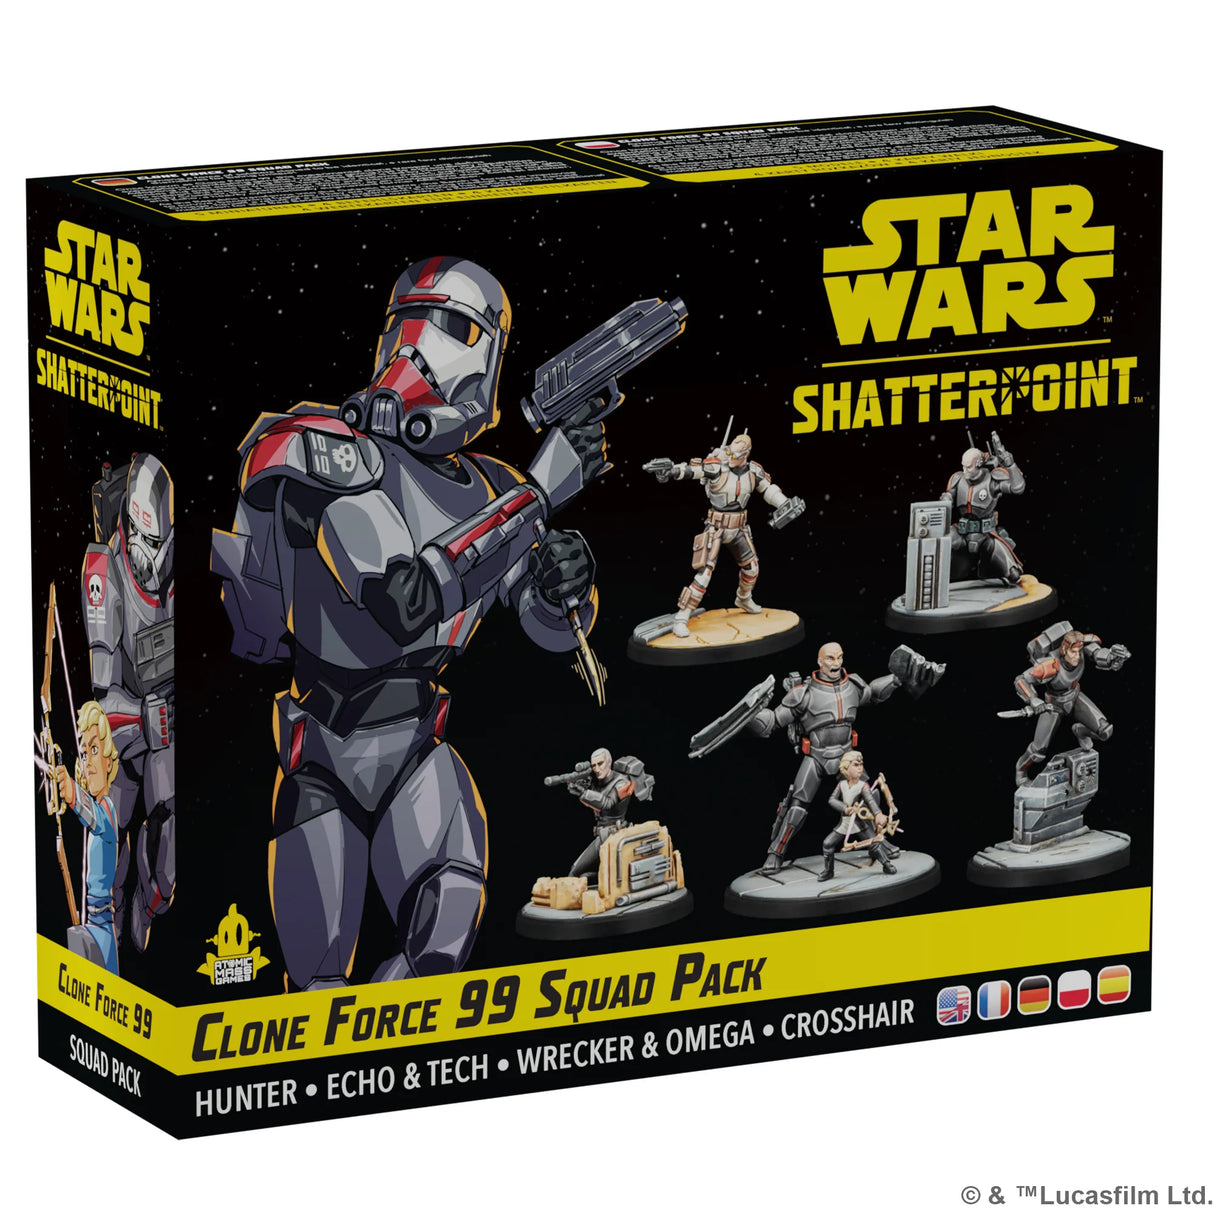 Star Wars Shatterpoint: Clone Force 99 Squad Pack (The Bad Batch)